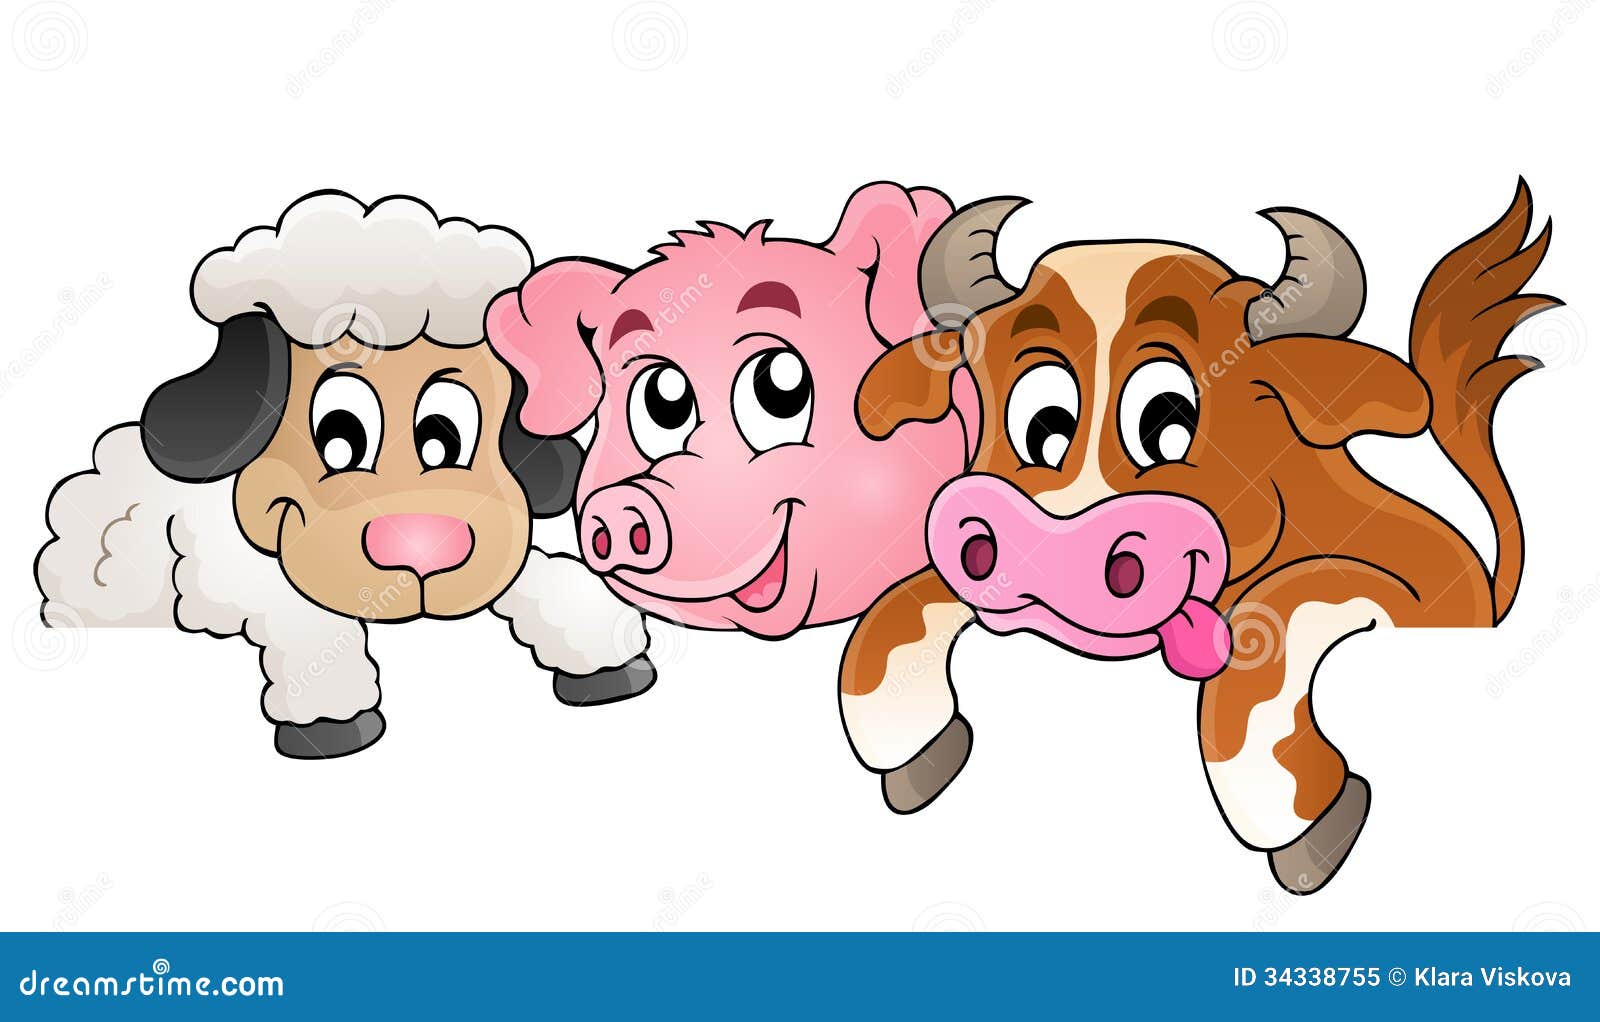 clipart of animals together - photo #15